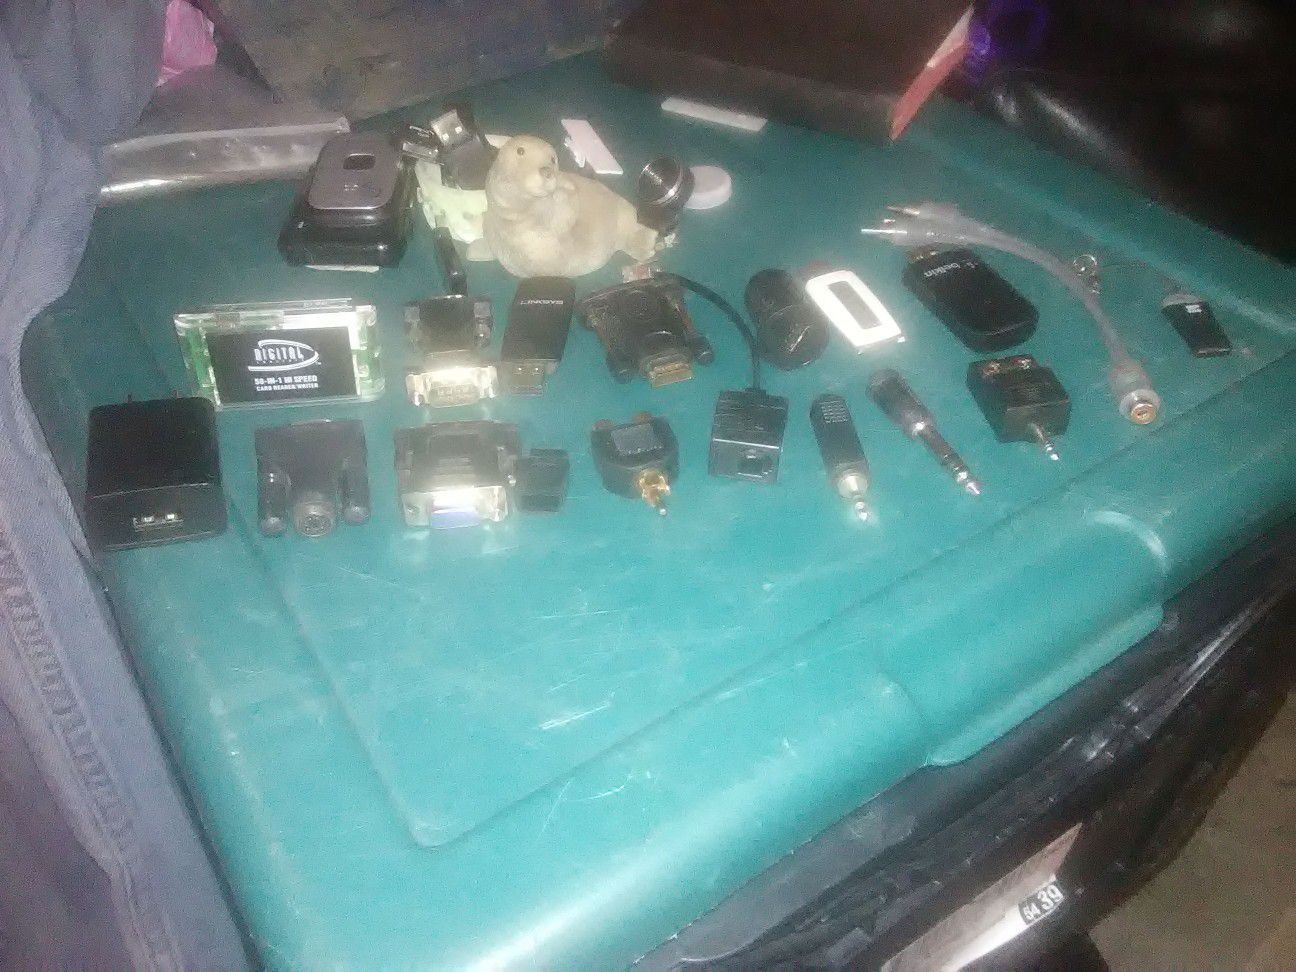 Lot of adapters and card readers